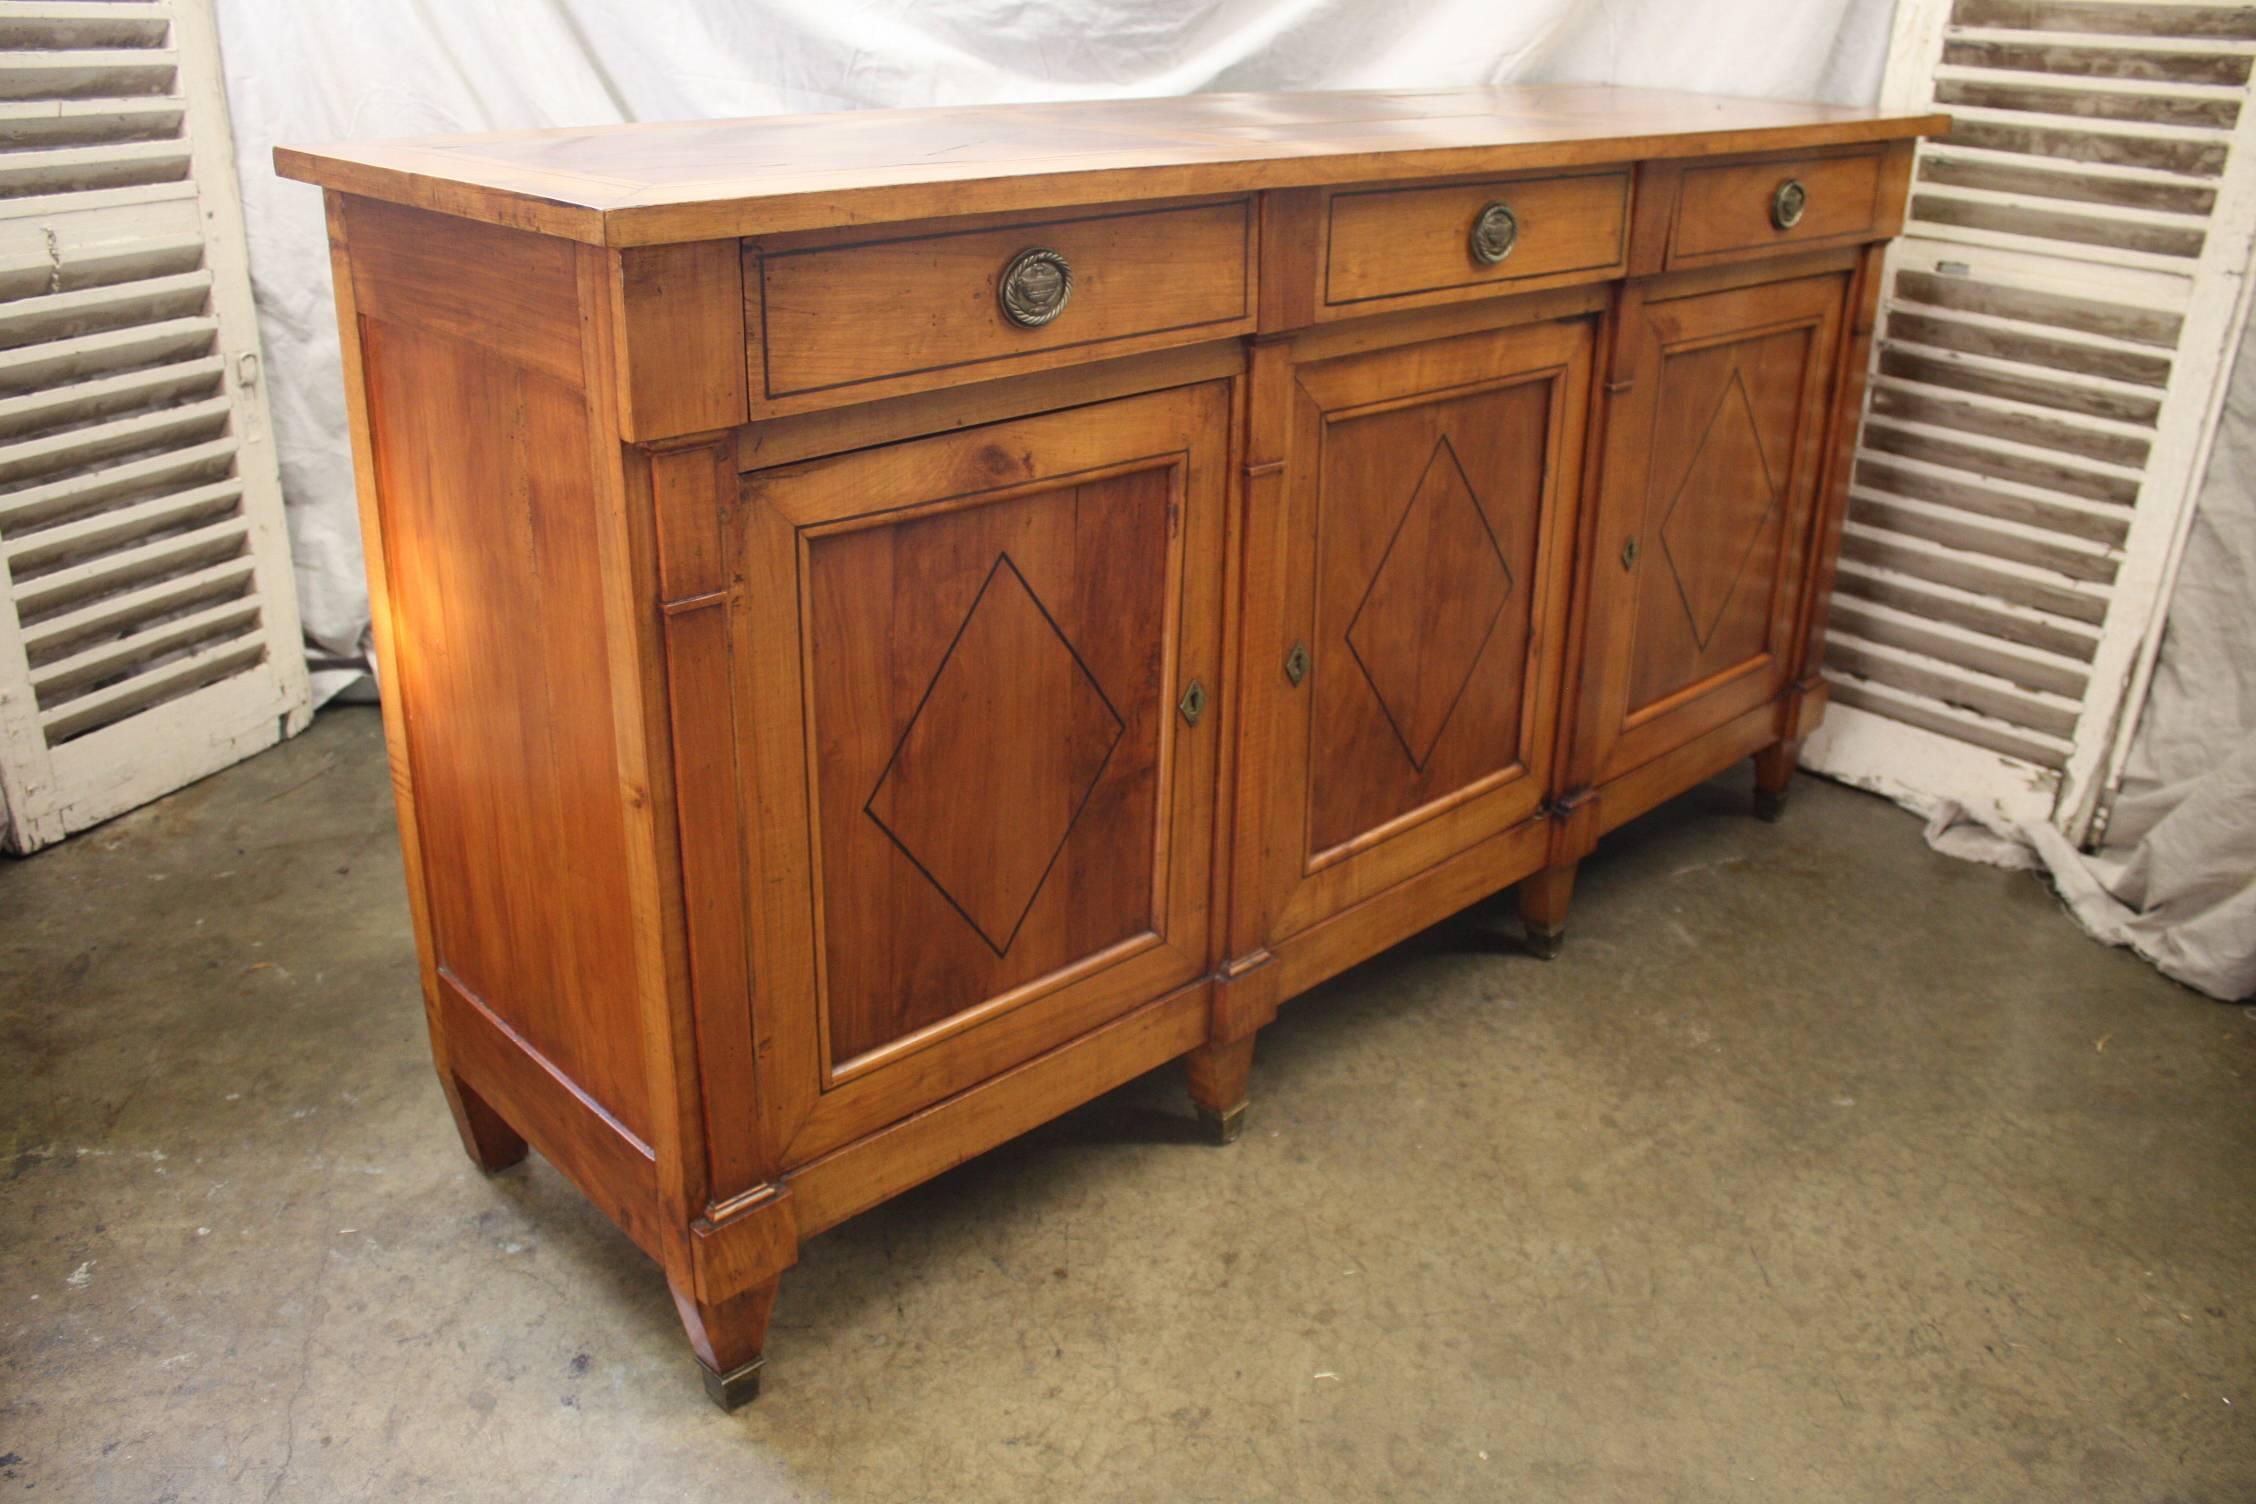 French Directoire period sideboard. 
Very charming by its proportions and simplicity.